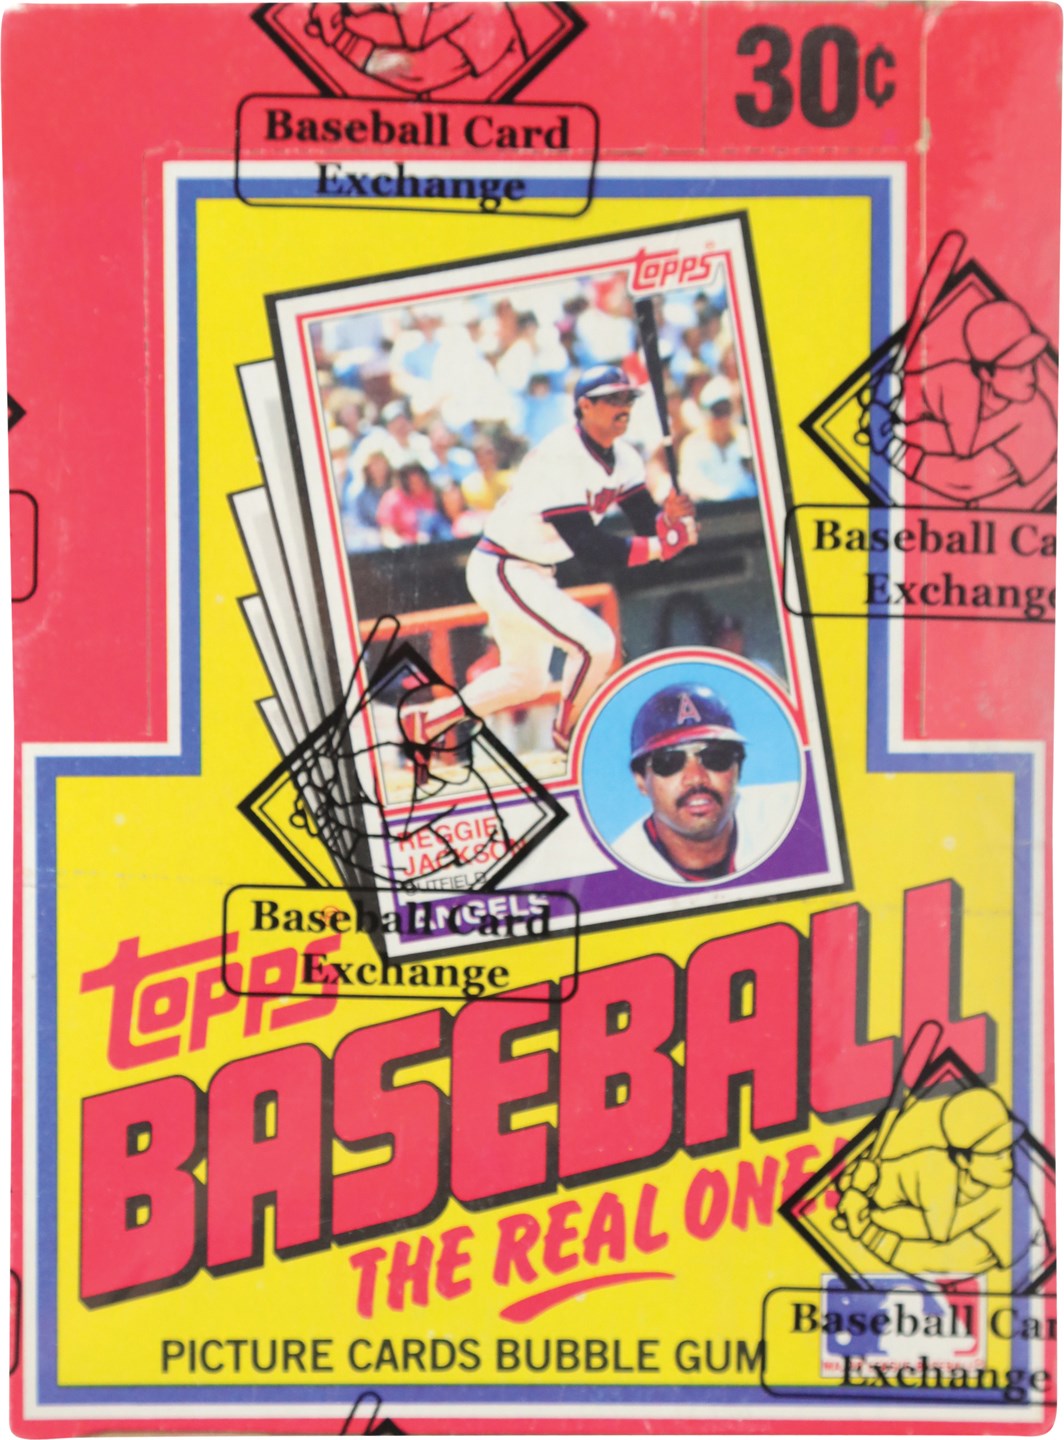 Unopened Boxes, Packs And Cases - 1983 Topps Baseball Unopened Wax Box (BBCE)